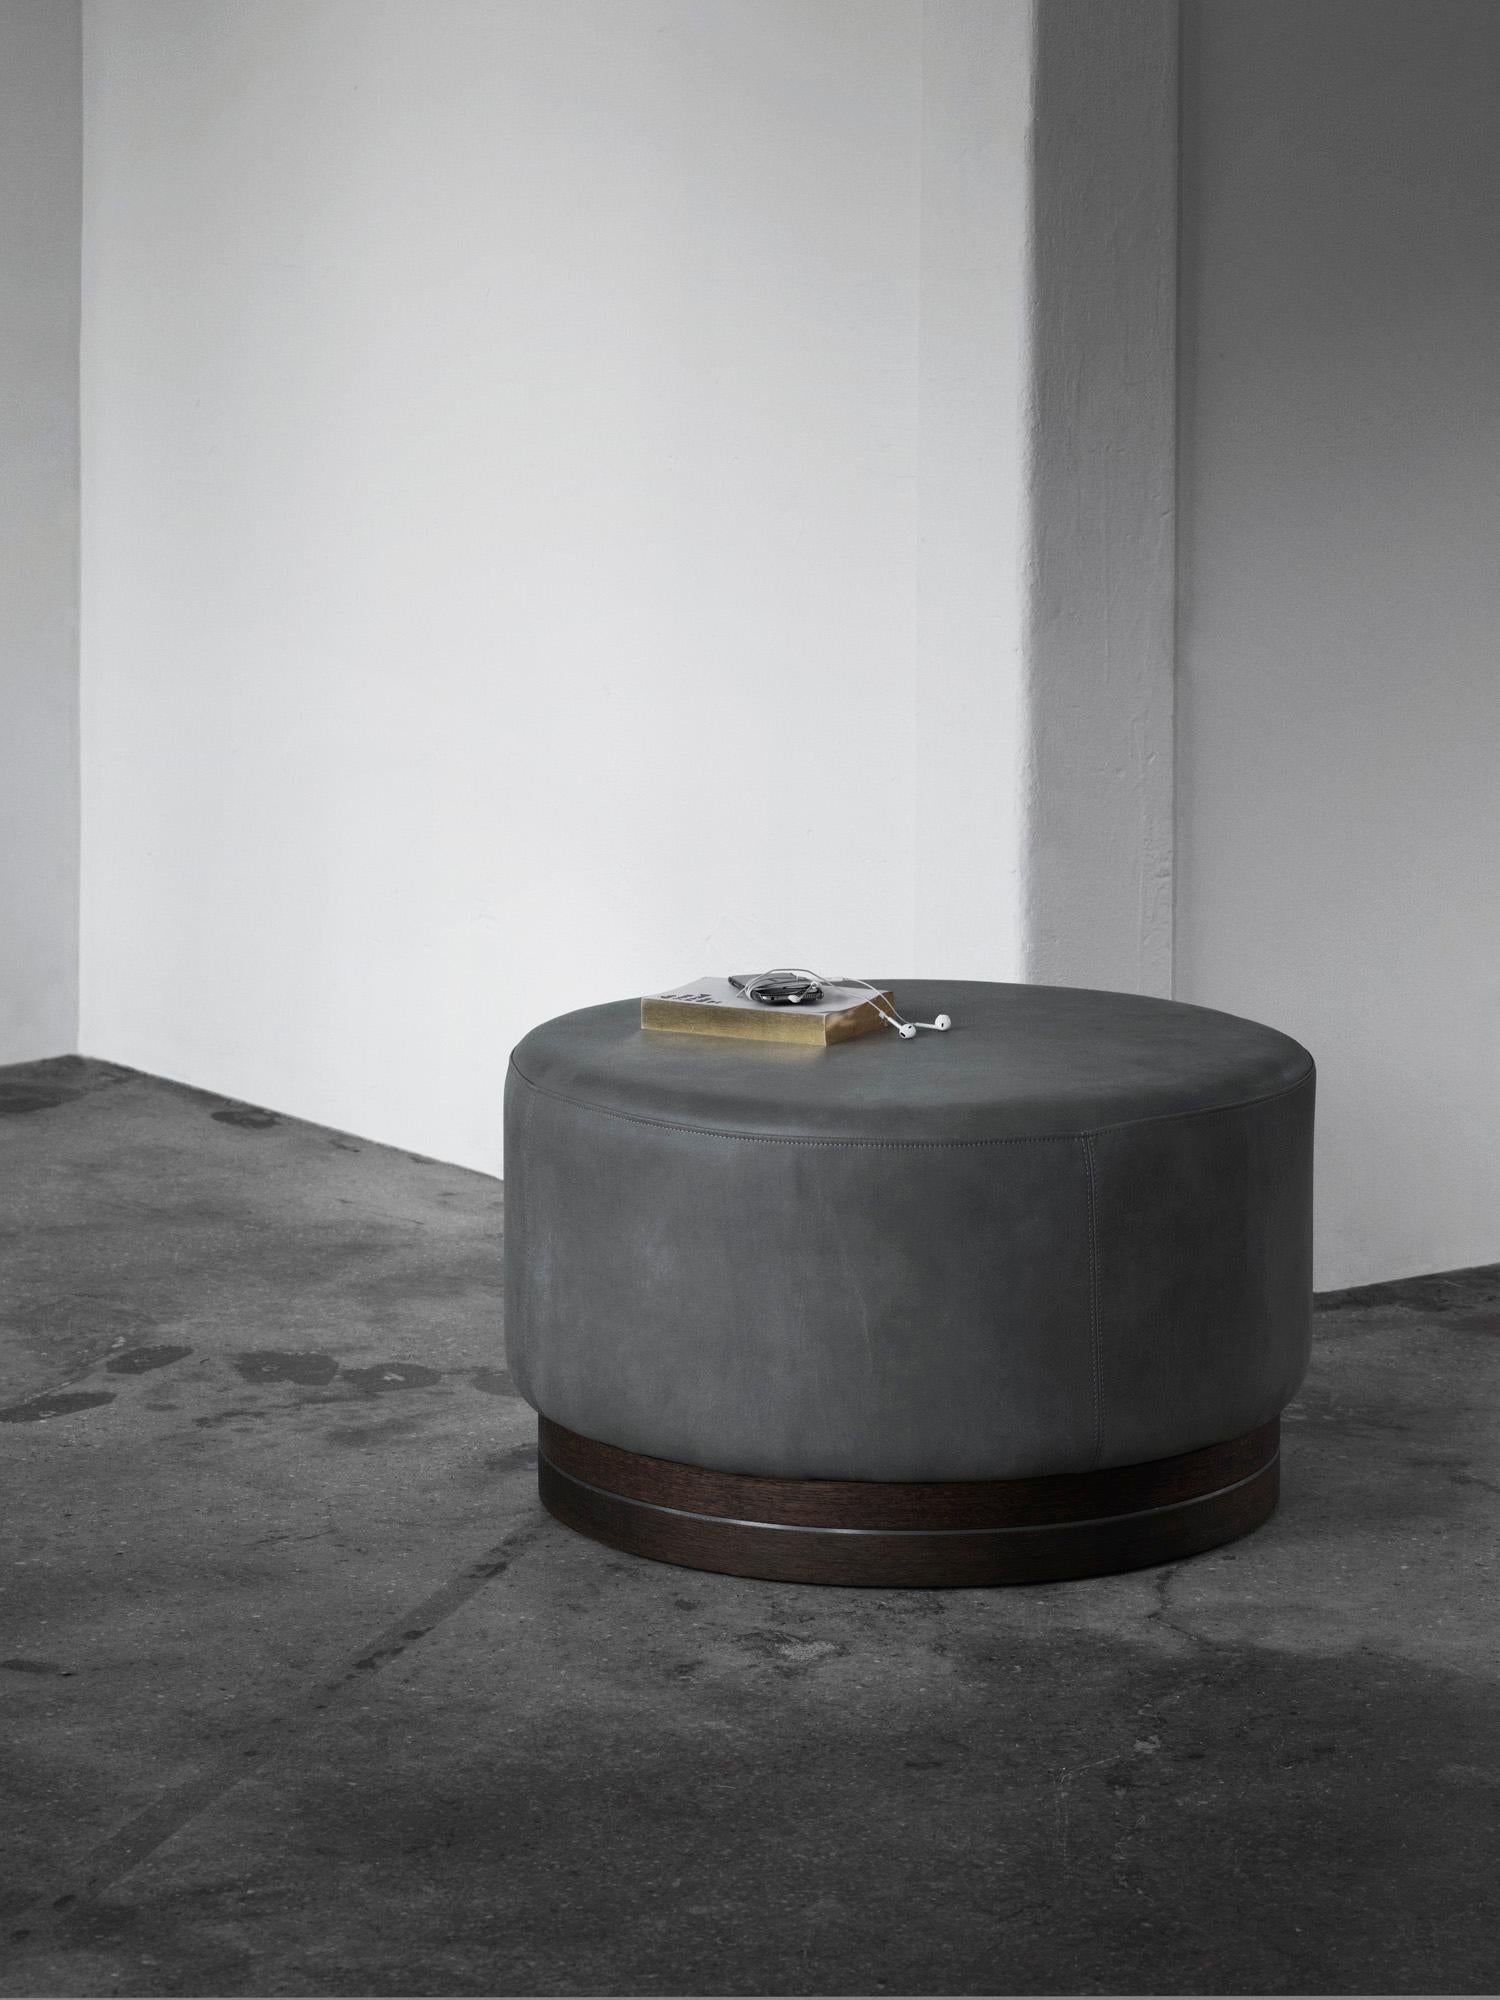 Modest in design yet solid in form, the handmade La Sorella pouf is a modern interpretation of the classic pouf. With its sculptural presence and soft textures, the pouf combines art and functionality. The use of natural materials of high quality